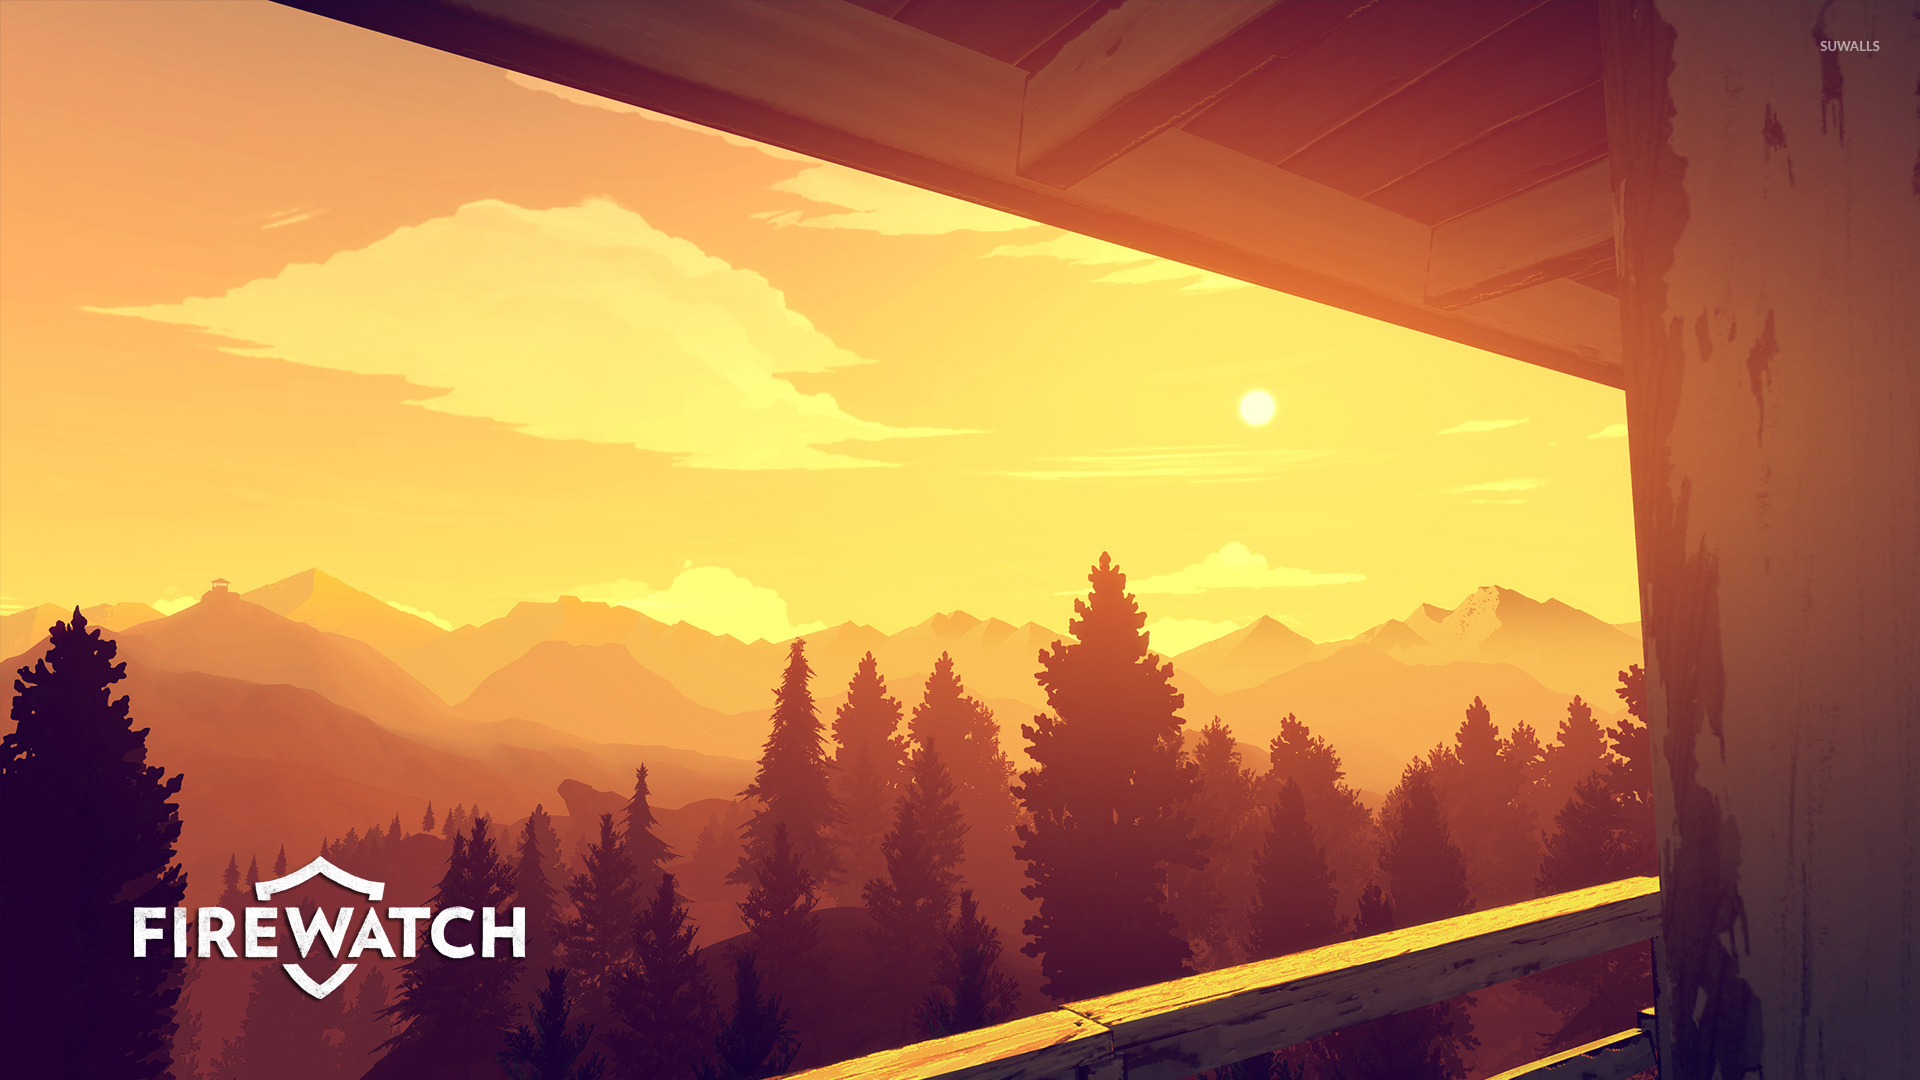 The view from the fire lookout tower in Firewatch wallpaper wallpaper